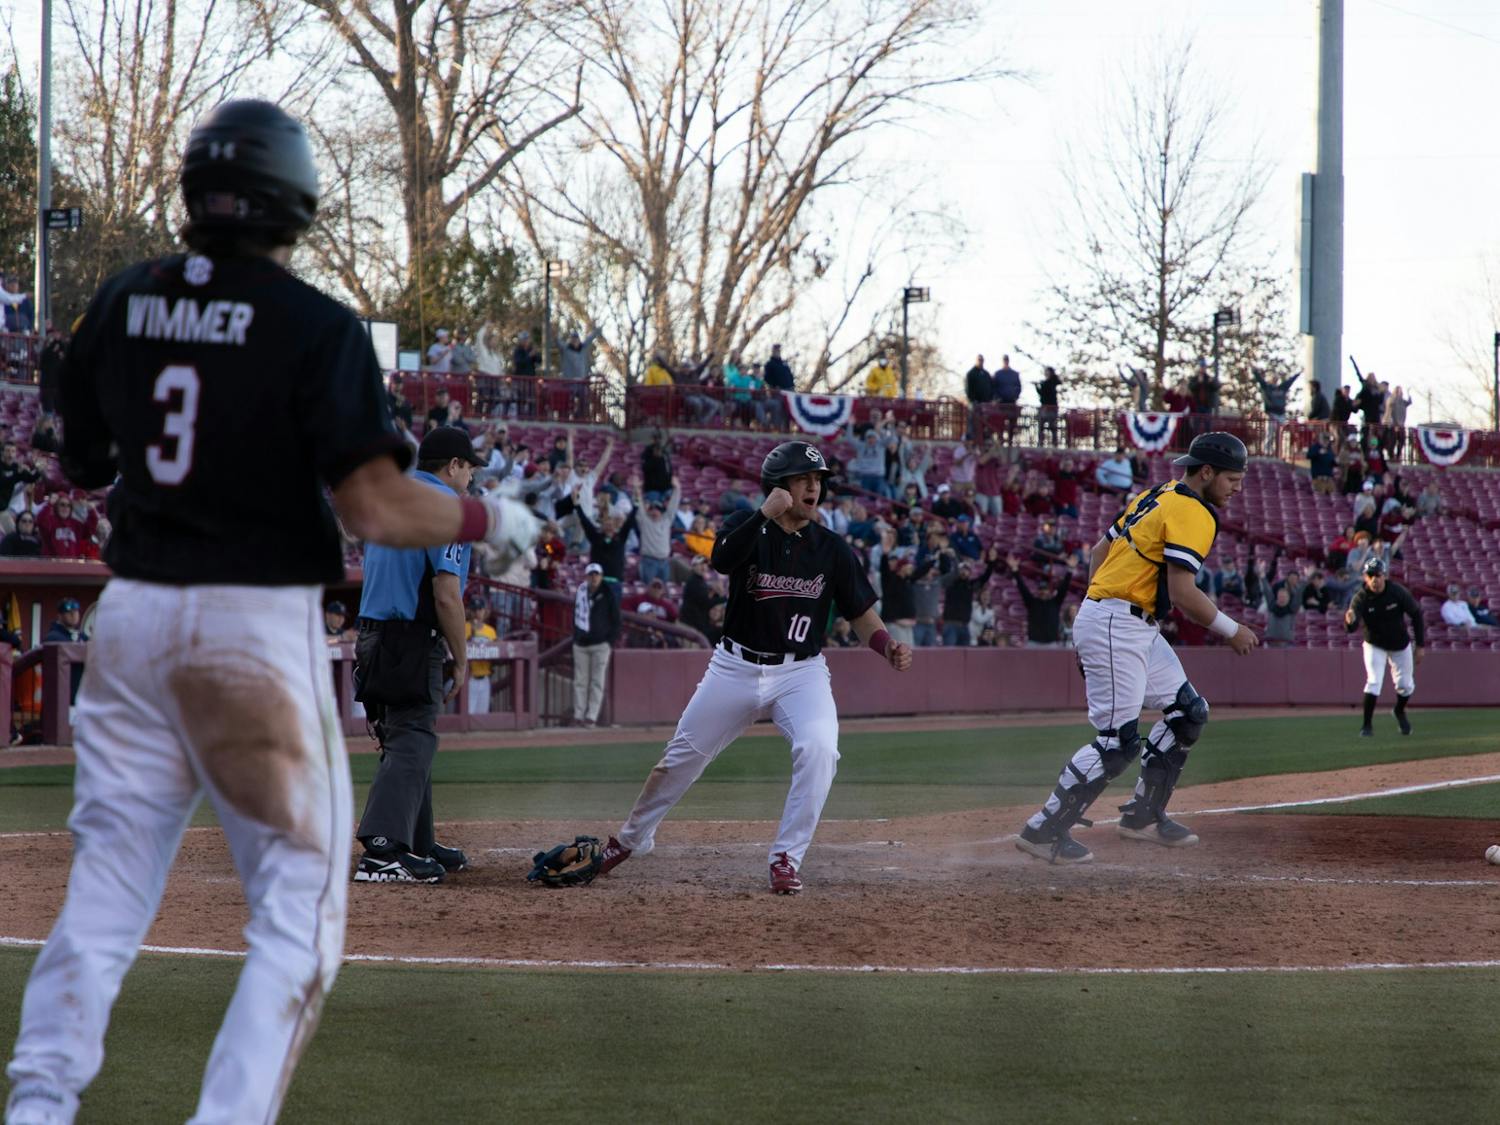 The Gamecock baseball team faced off against UNC Greensboro at Founders Park in their opening series. South Carolina won the series by beating UNCG in extra innings of its final game on Feb. 20, 2022.